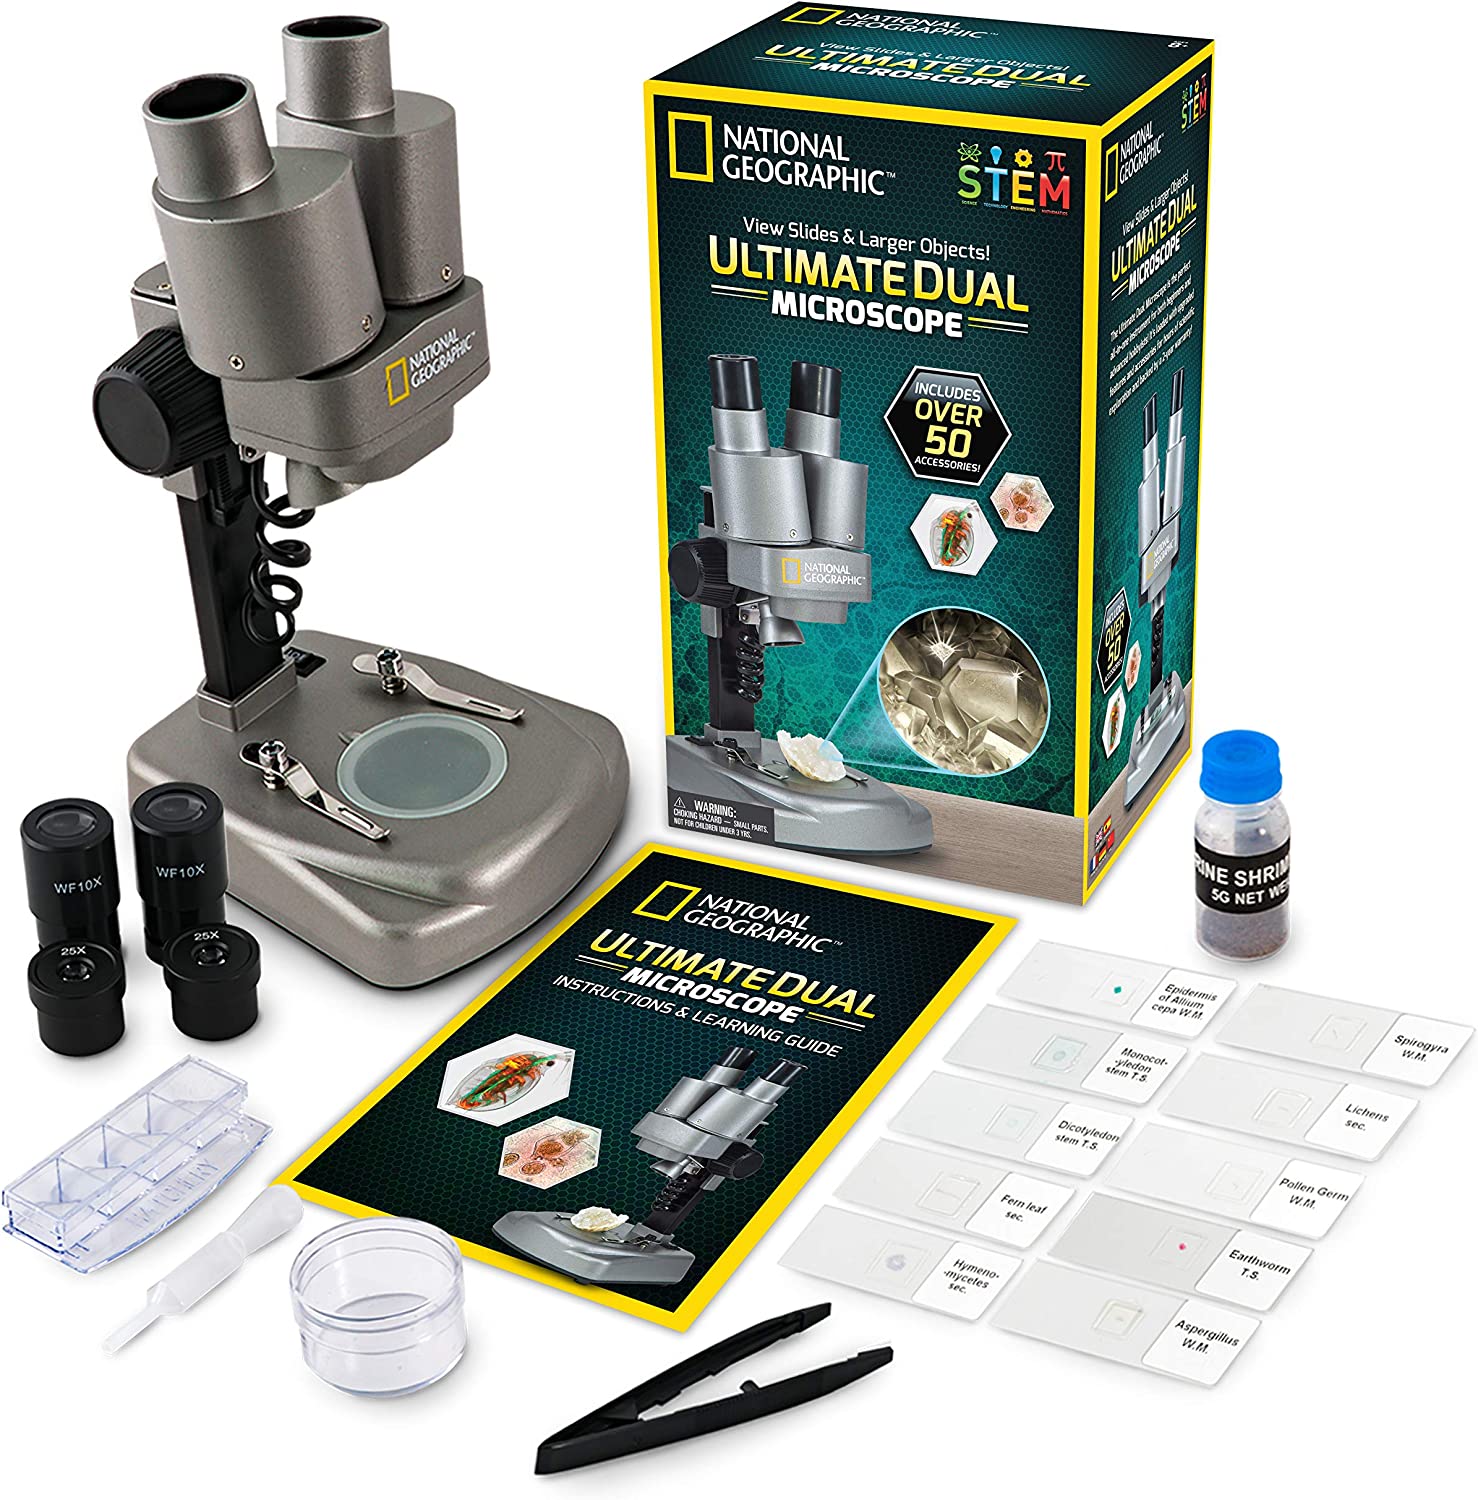 NATIONAL GEOGRAPHIC Dual LED Student Microscope